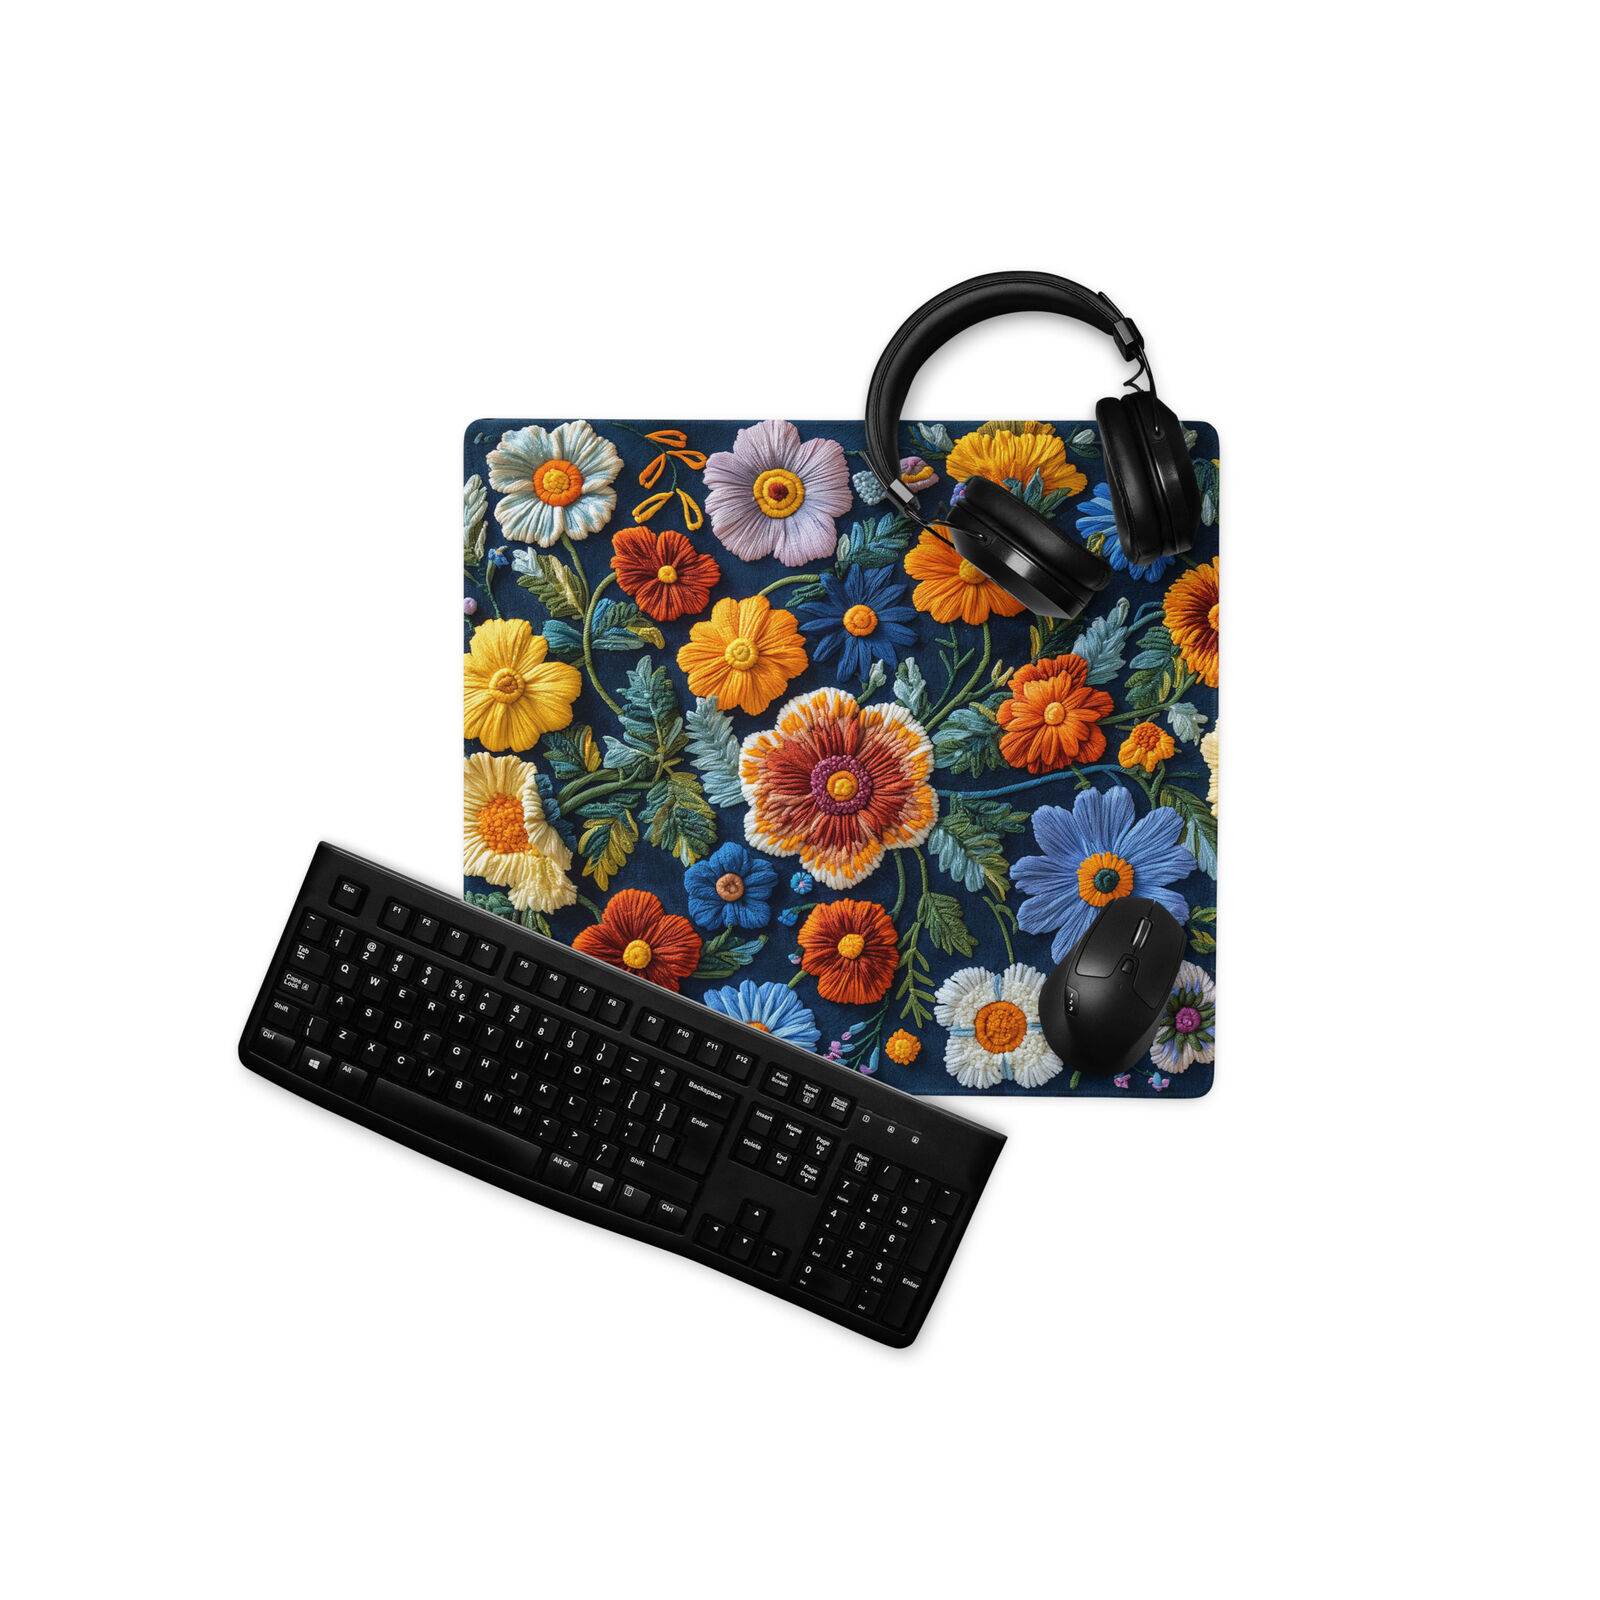 Floral Stitching Gaming Mouse Pad, Wildflowers Mousepad, Daisy Extended Deskmat